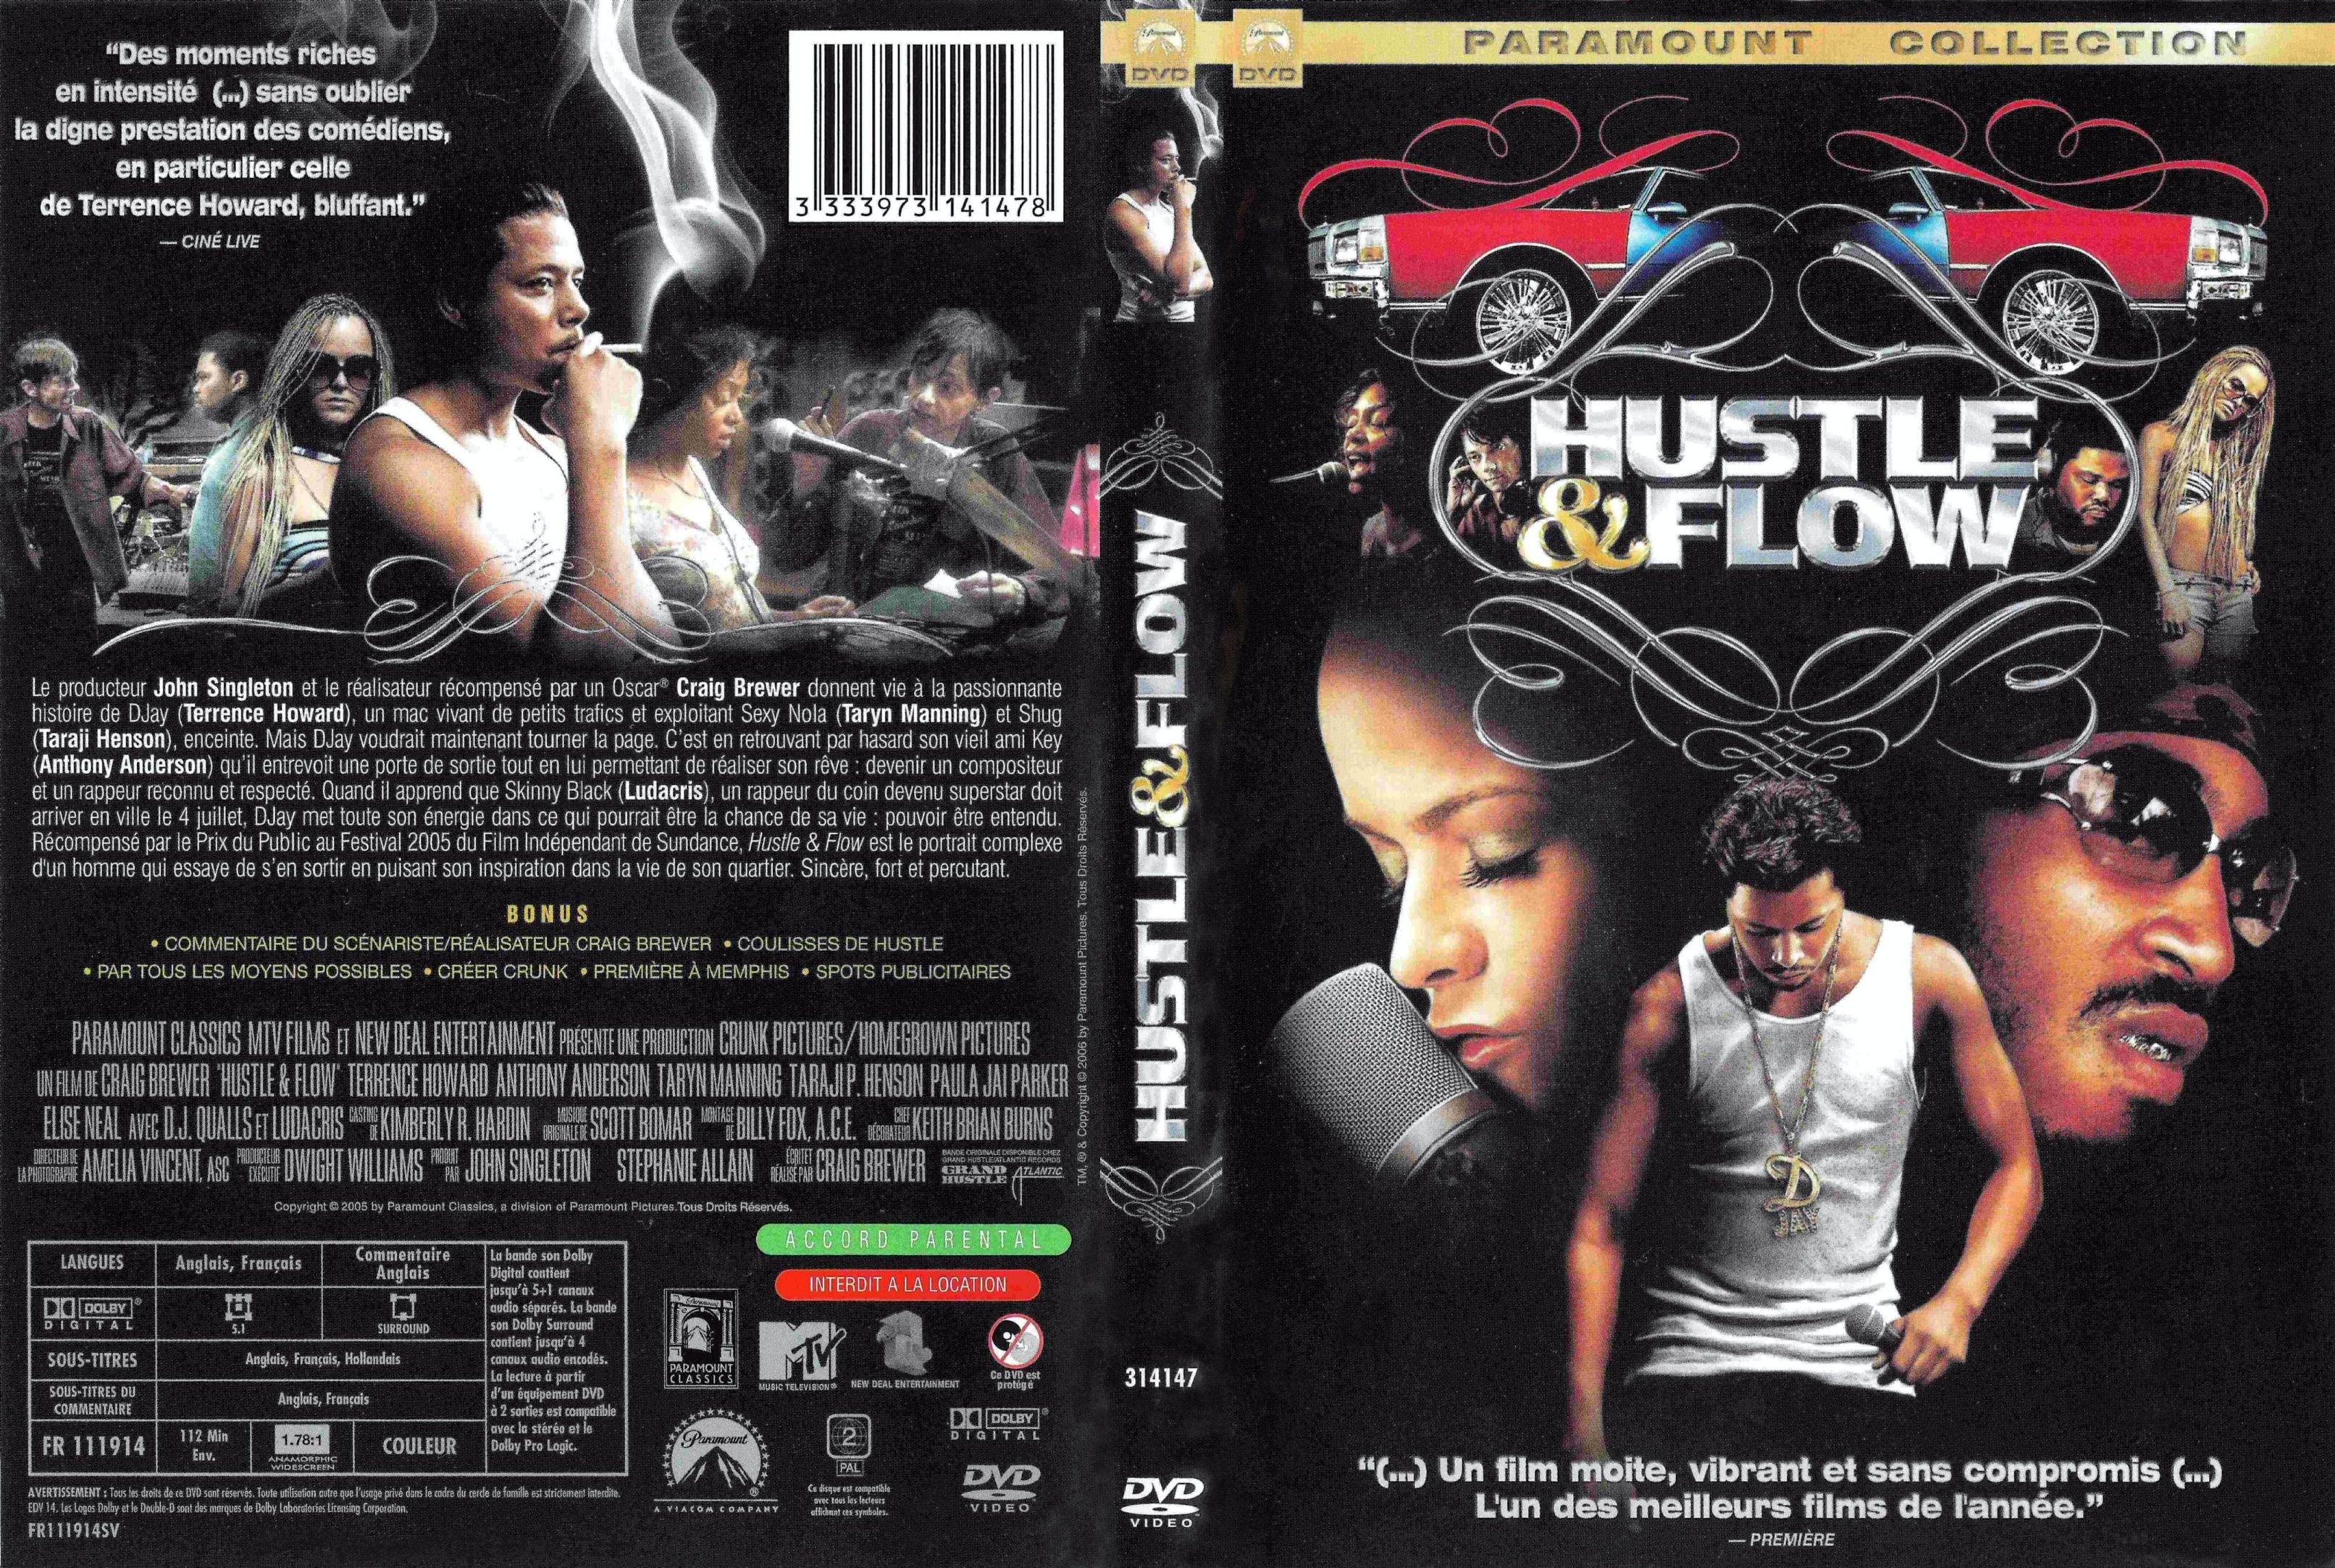 Jaquette DVD Hustle and Flow